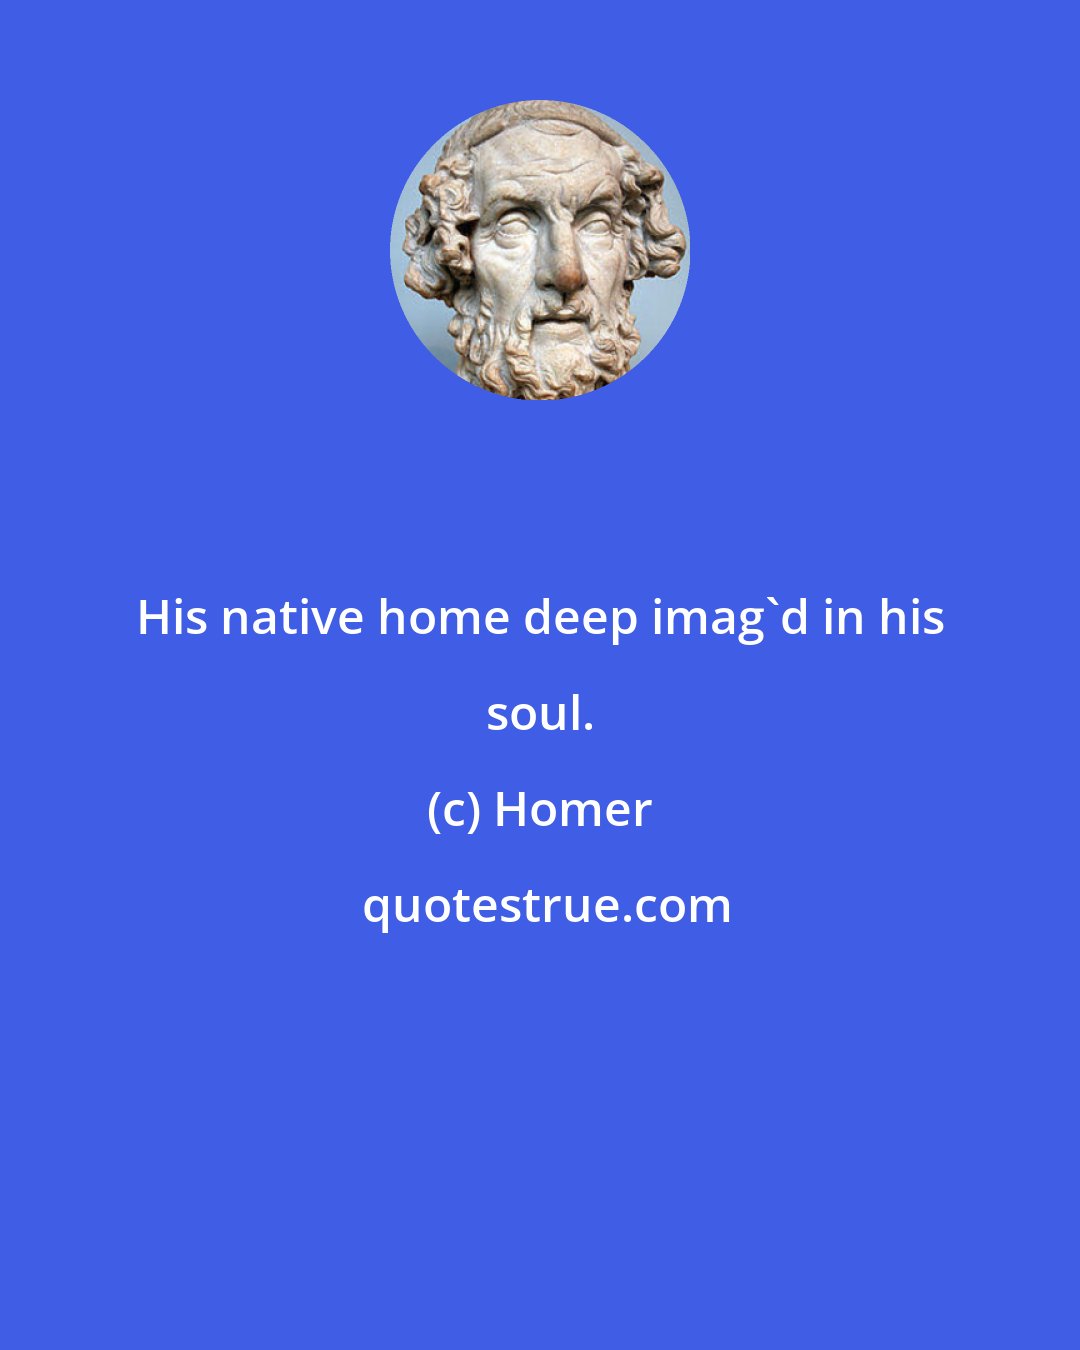 Homer: His native home deep imag'd in his soul.